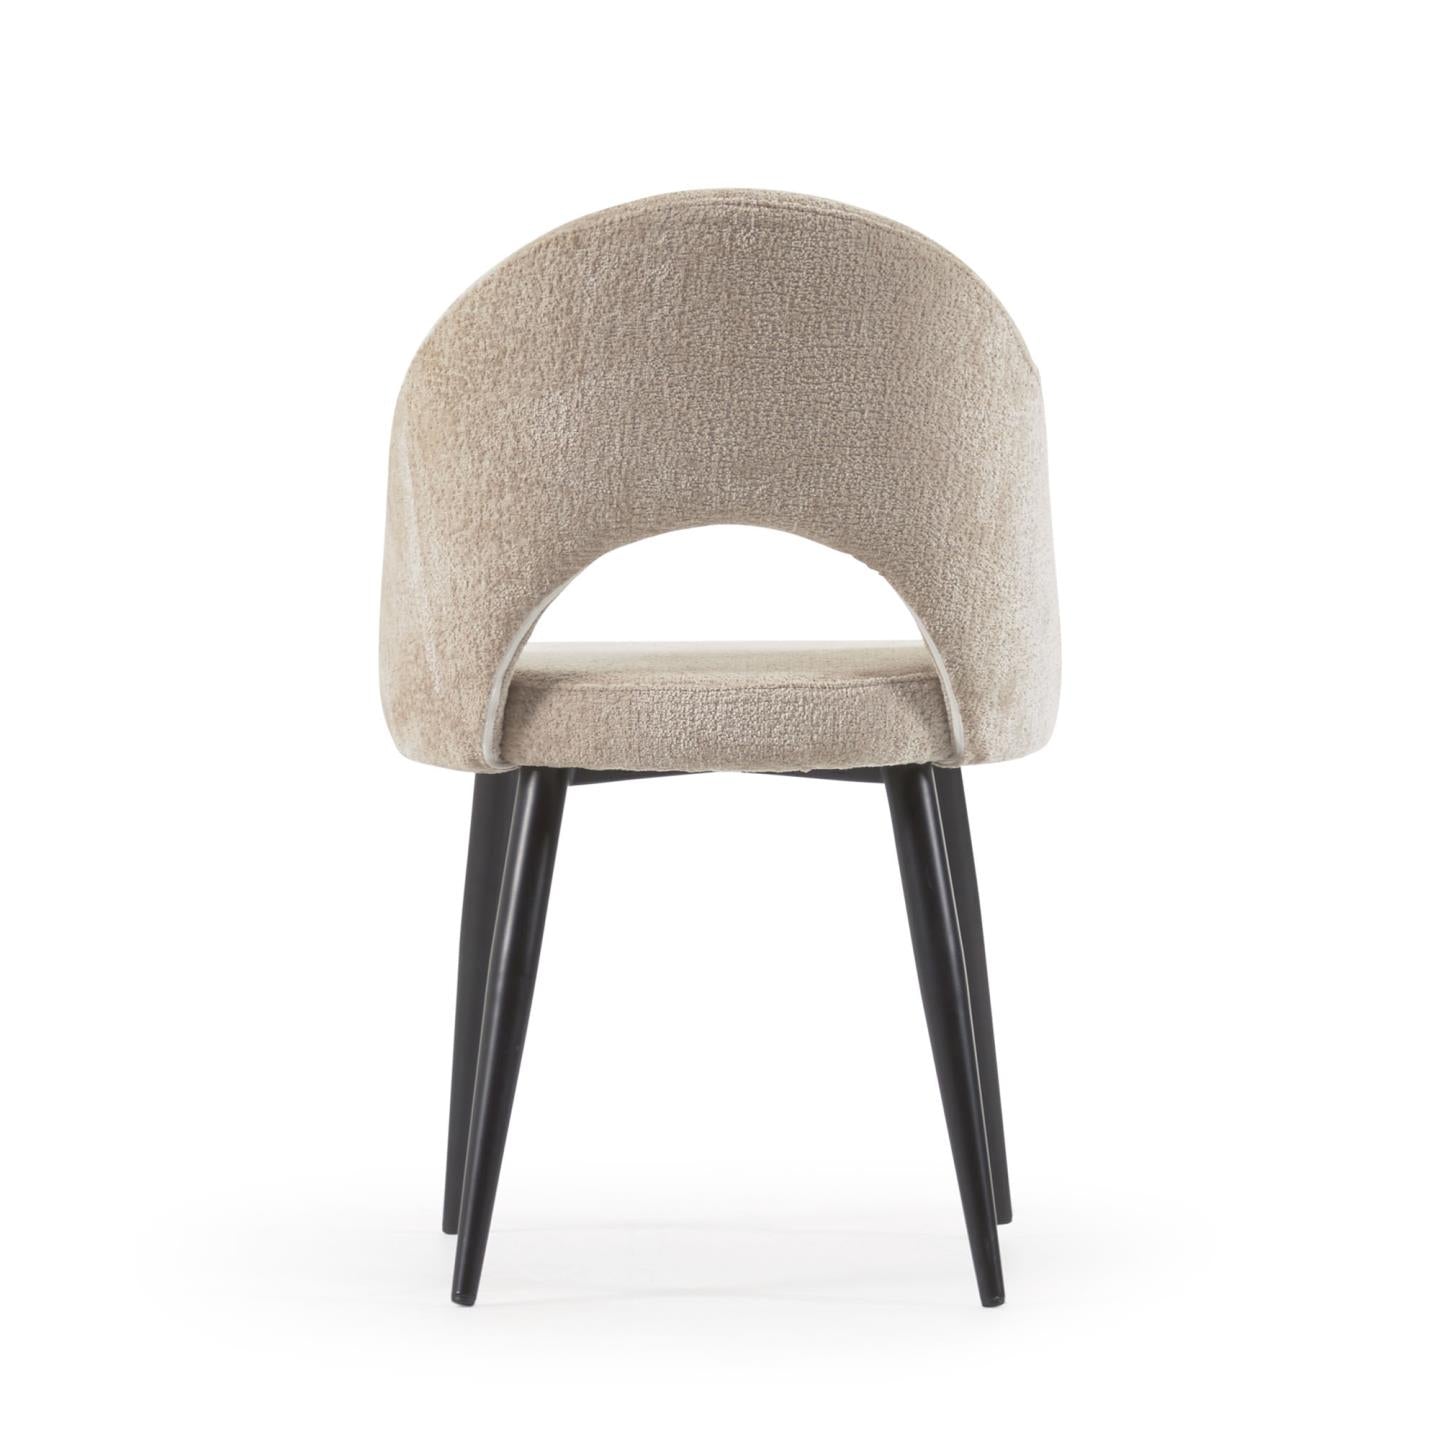 Beige chenille Mael chair with steel legs with black finish